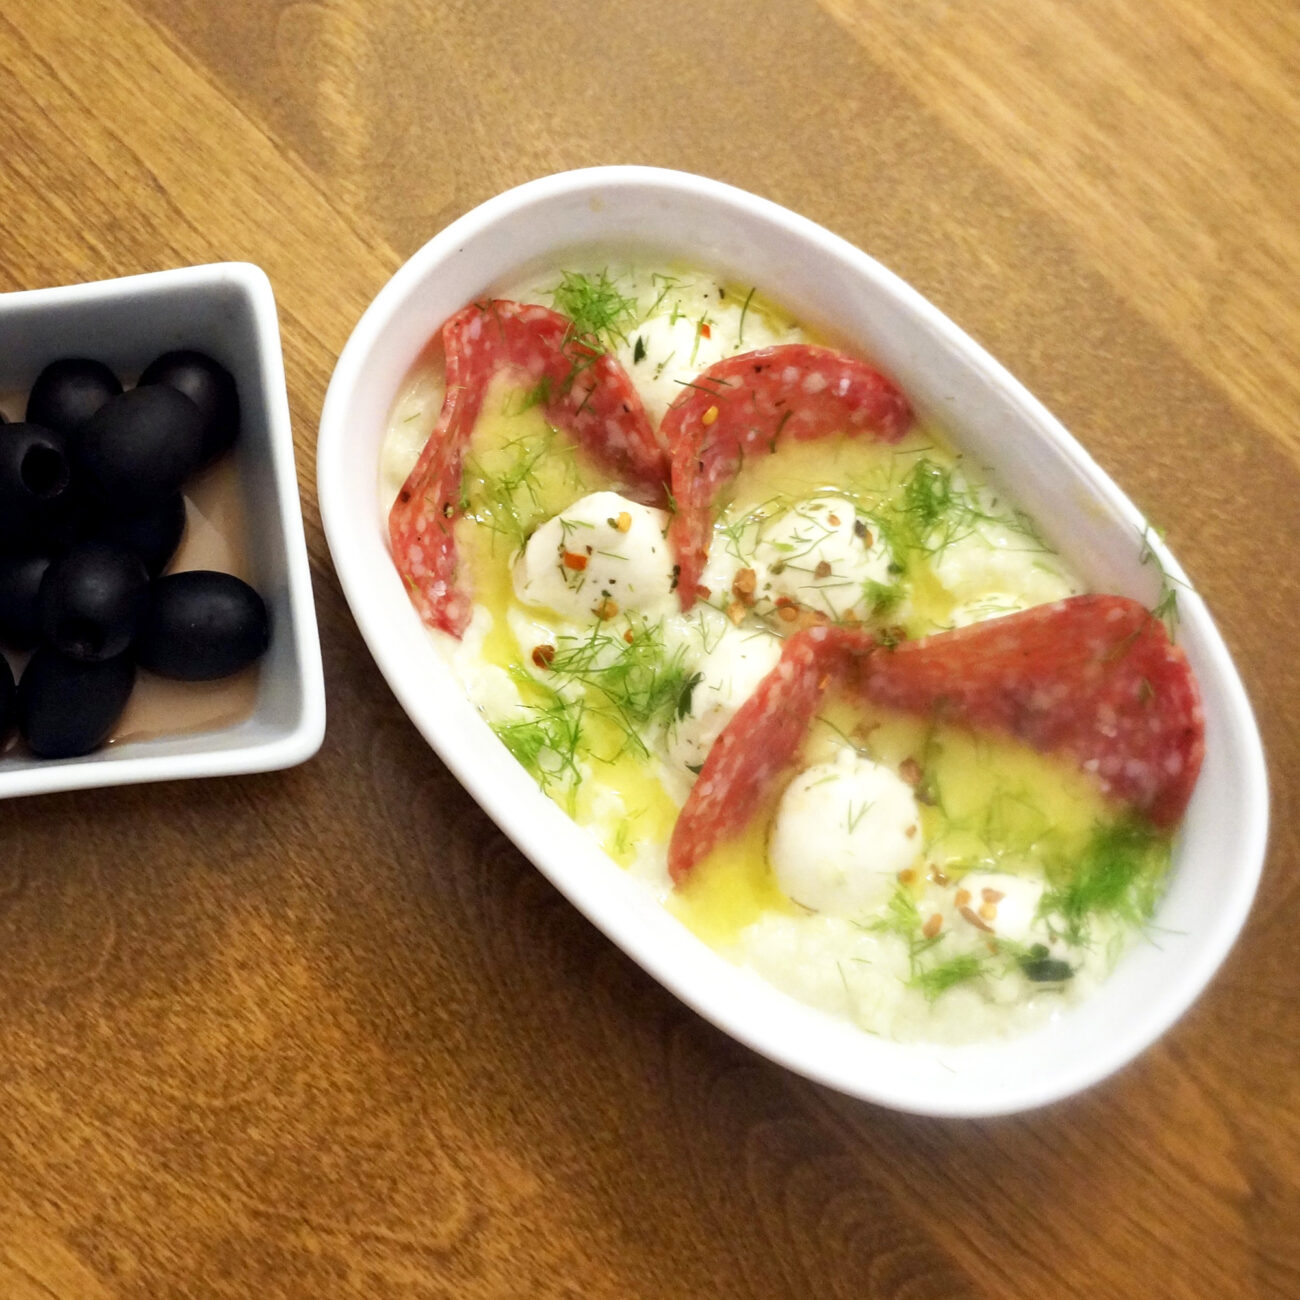 Baby buffalo mozzarella with fennel puree and salami with olives